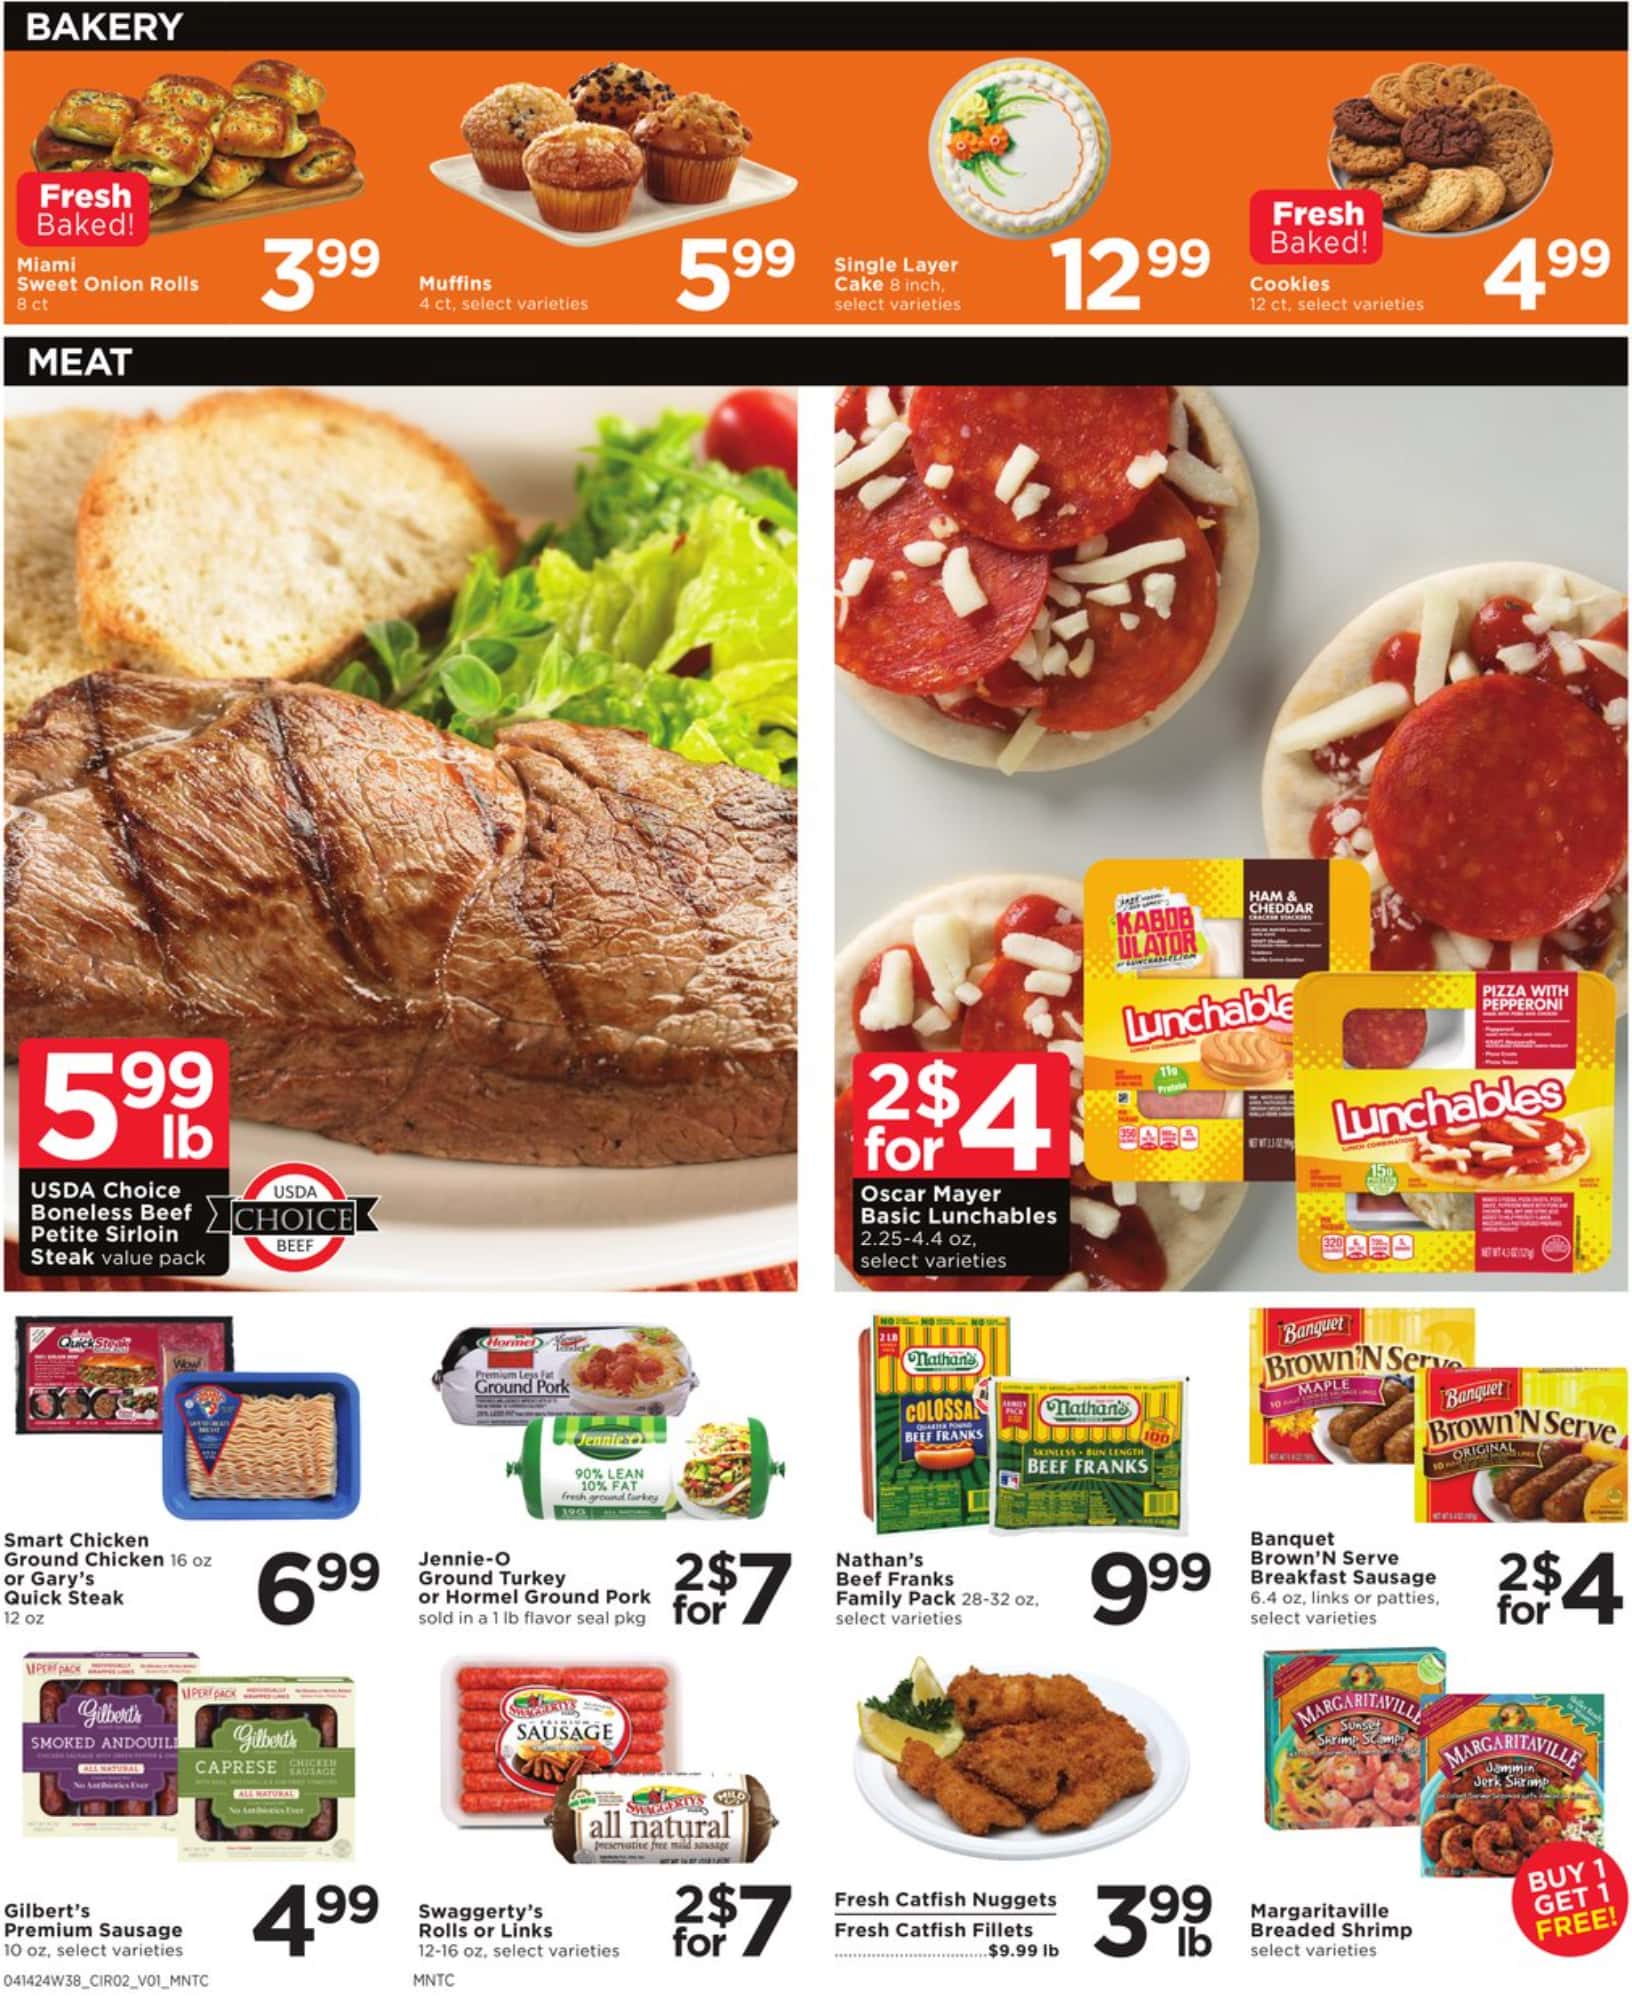 CubFoods_weekly_ad_041424_04